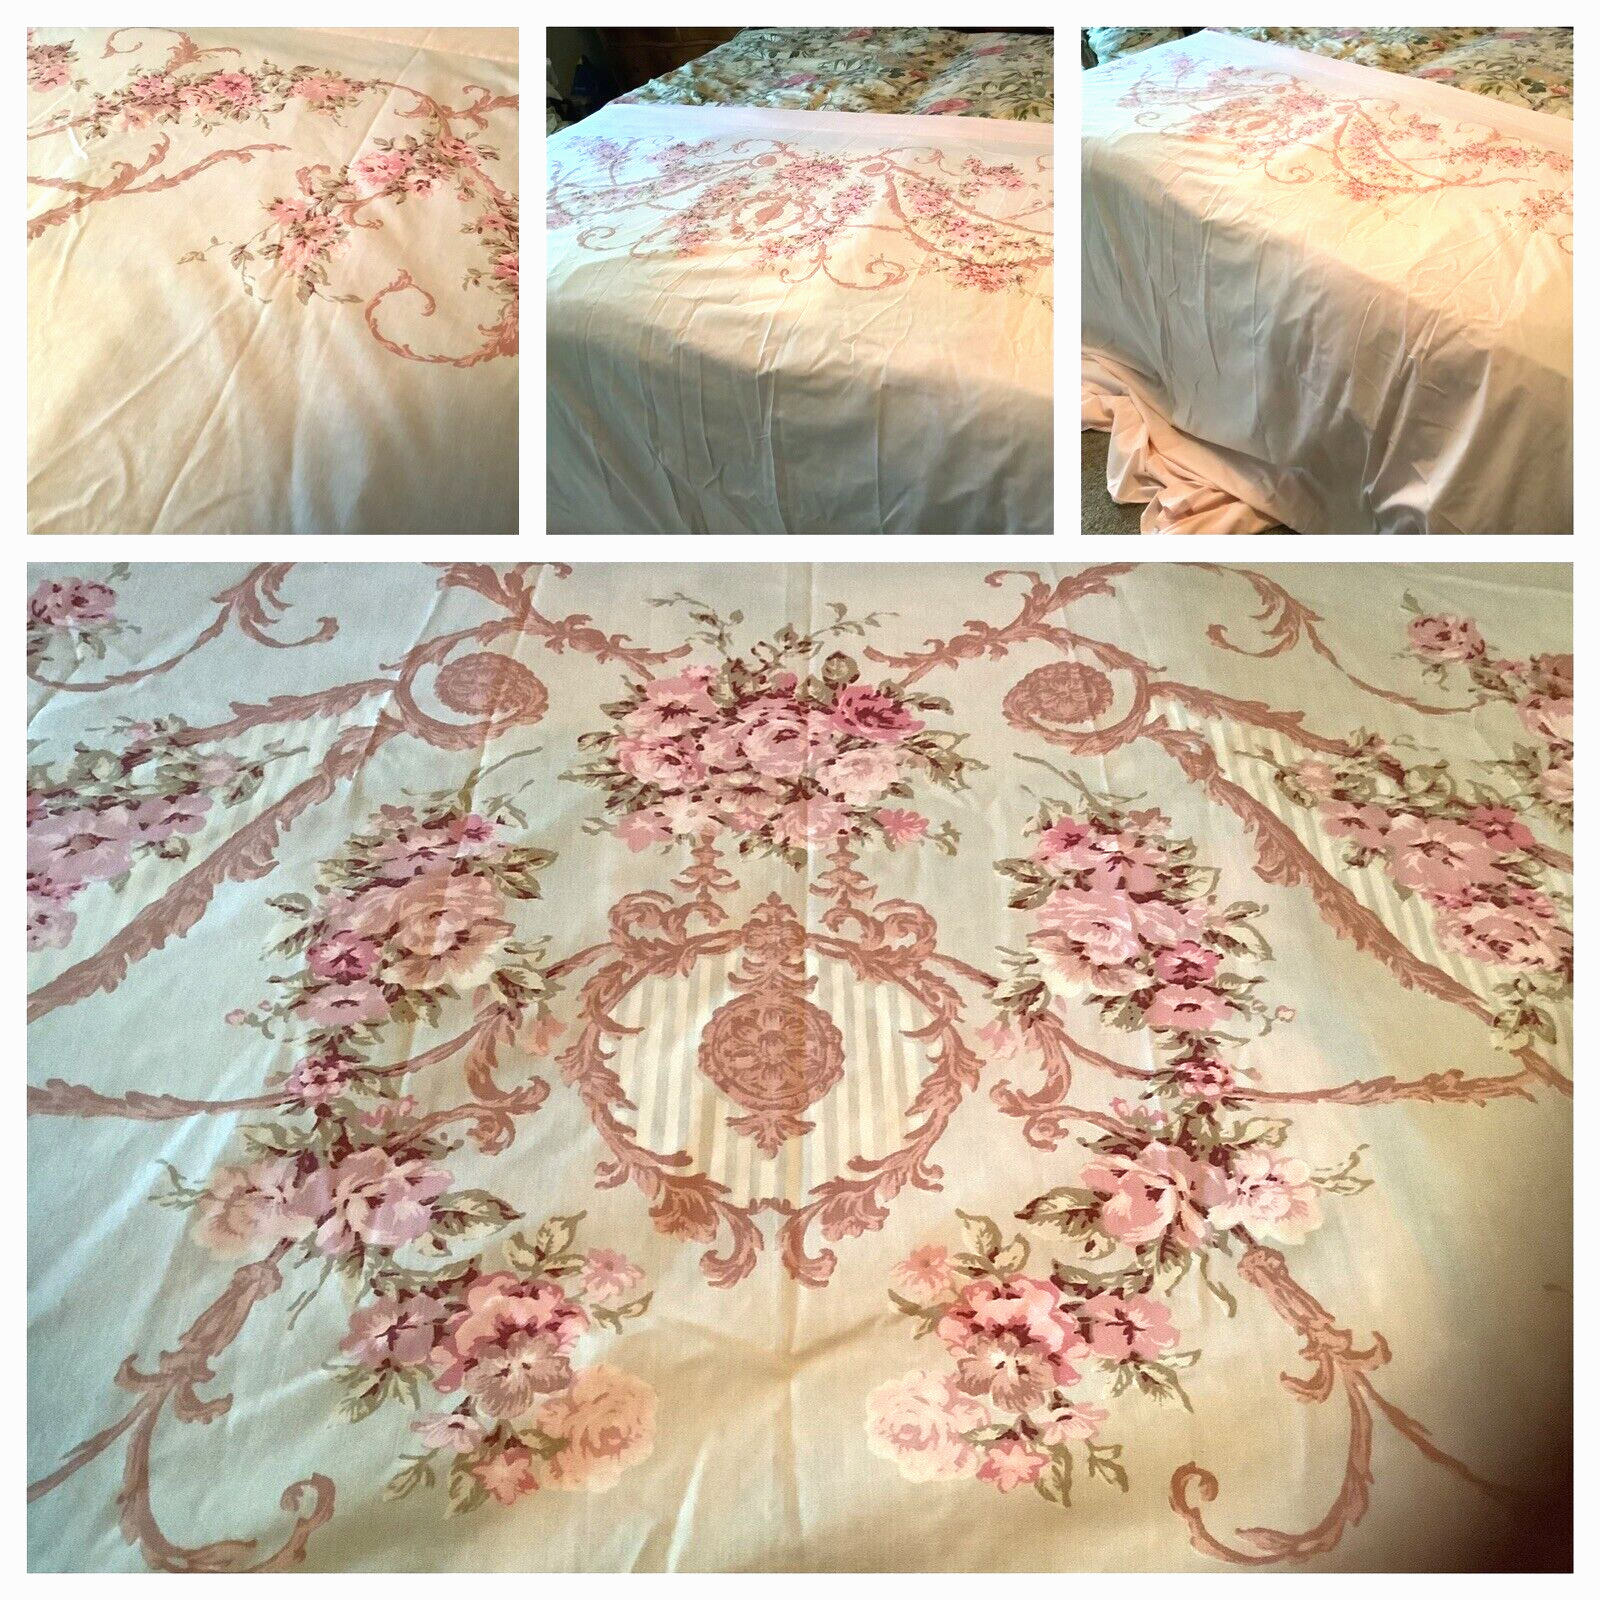 VTG 70'S PINK W/ VICTORIAN FLORAL BORDER PERCALE FLAT SHEET SZ KING